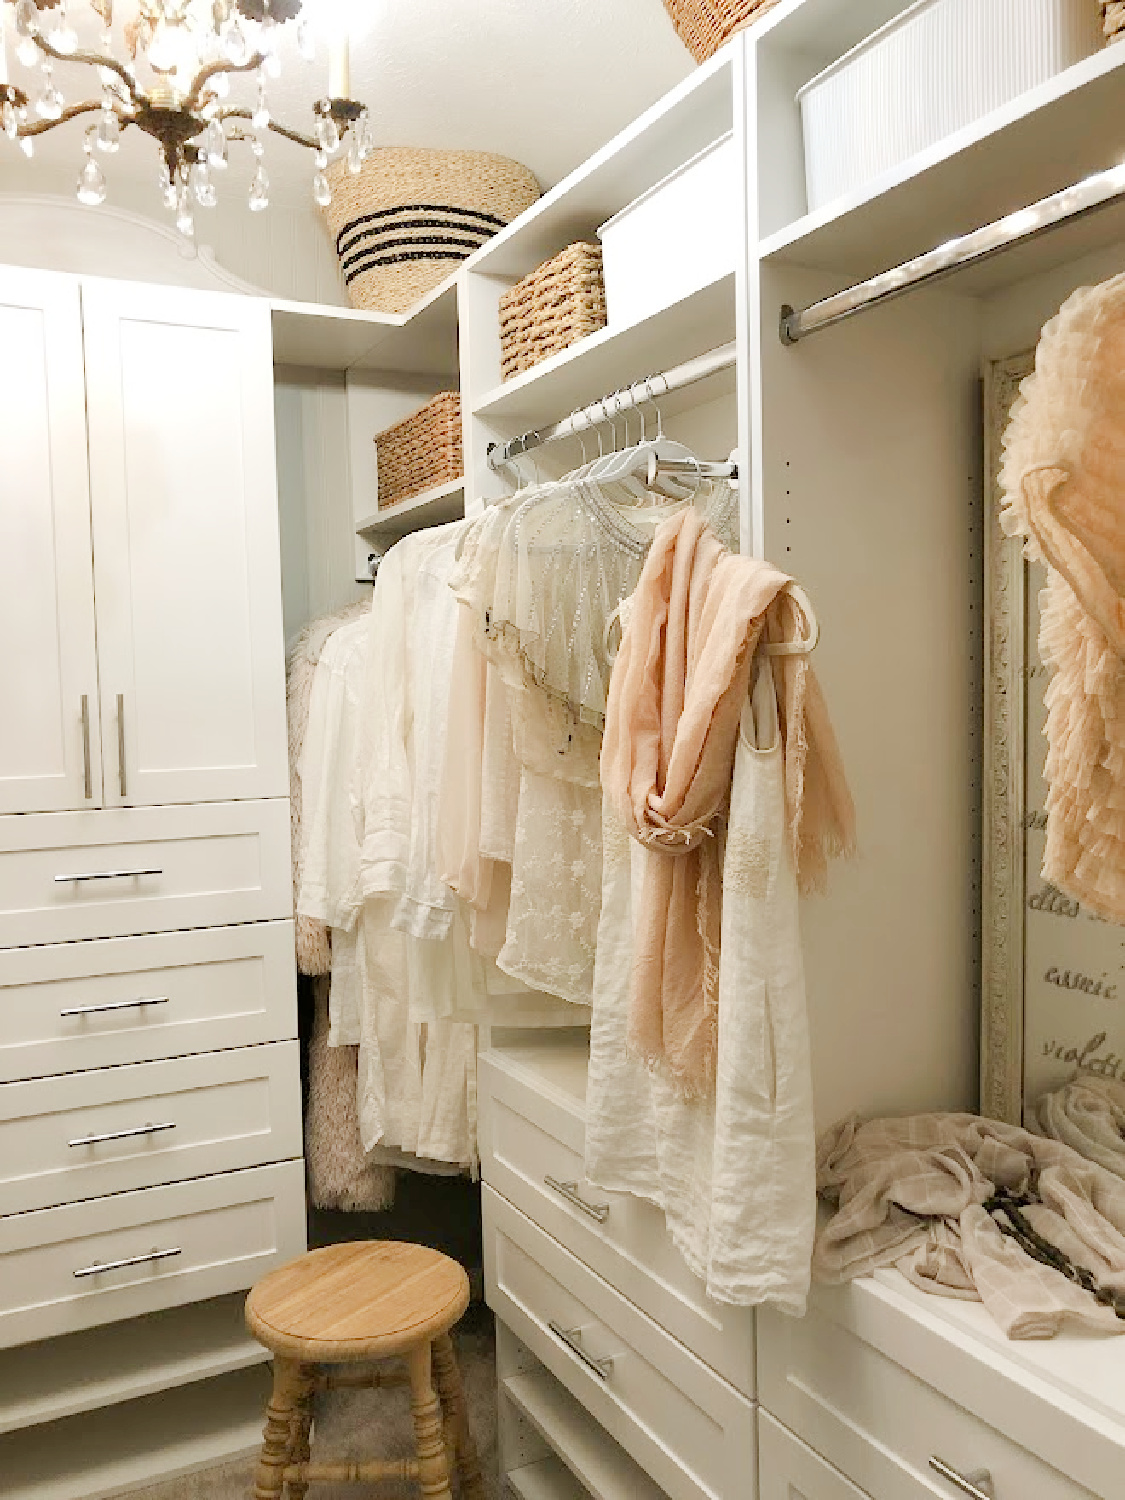 Hello Lovely's DIY custom closet with white Shaker style towers and drawers (Modular Closets). See the before/after photos and find tips for a successful closet upgrade. #diycloset #customclosetideas #closetmakeover #closetmodules #diyclosetmakeover